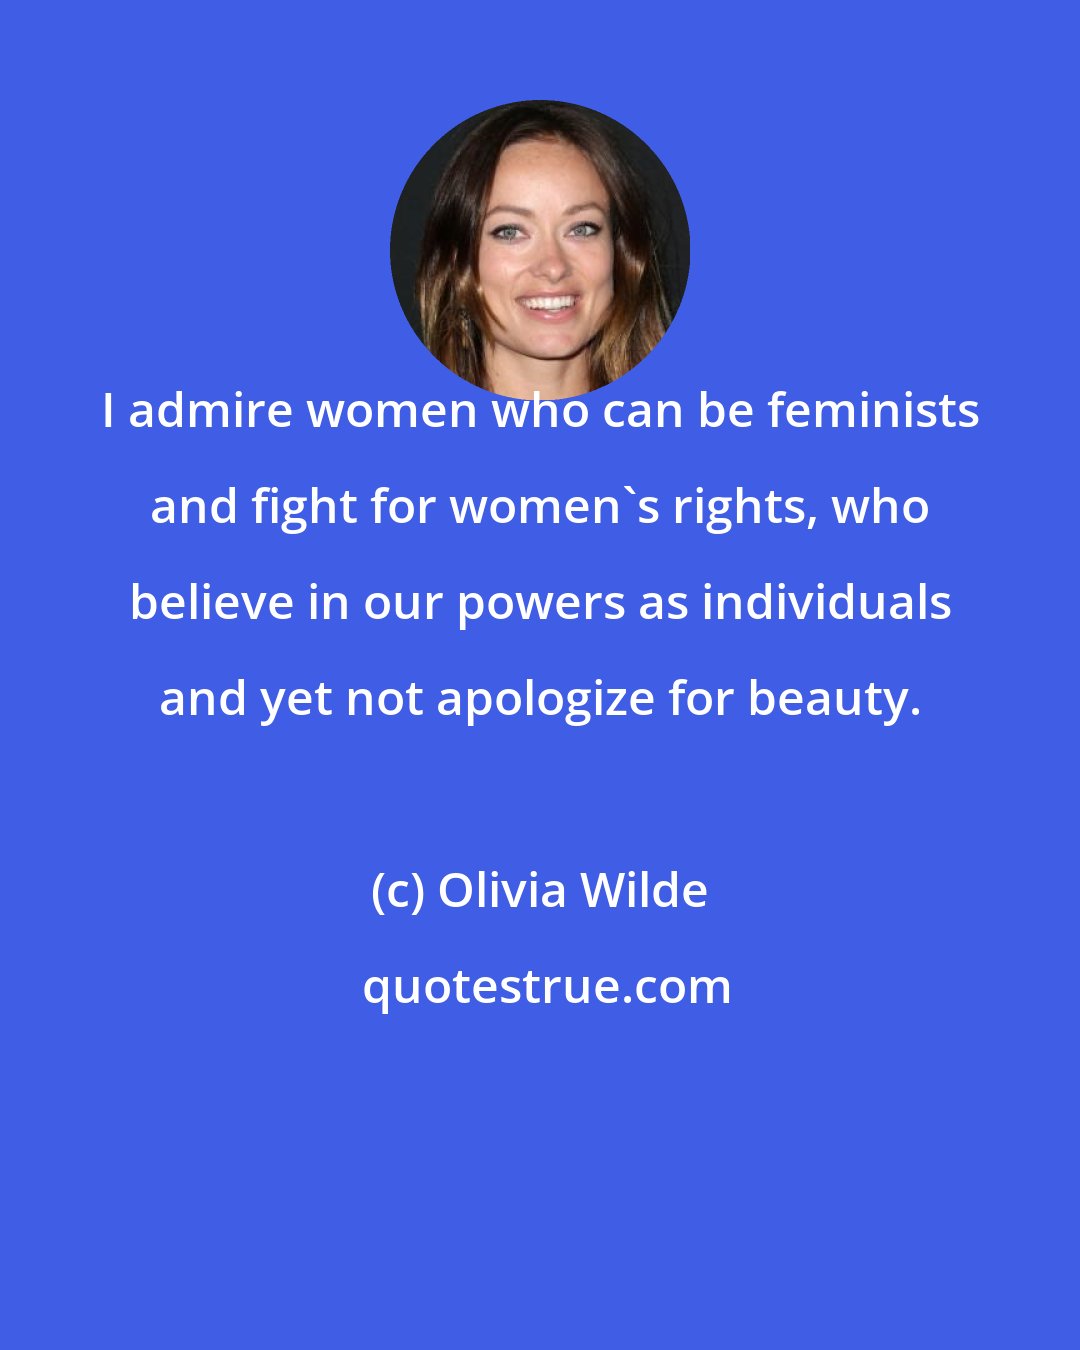 Olivia Wilde: I admire women who can be feminists and fight for women's rights, who believe in our powers as individuals and yet not apologize for beauty.